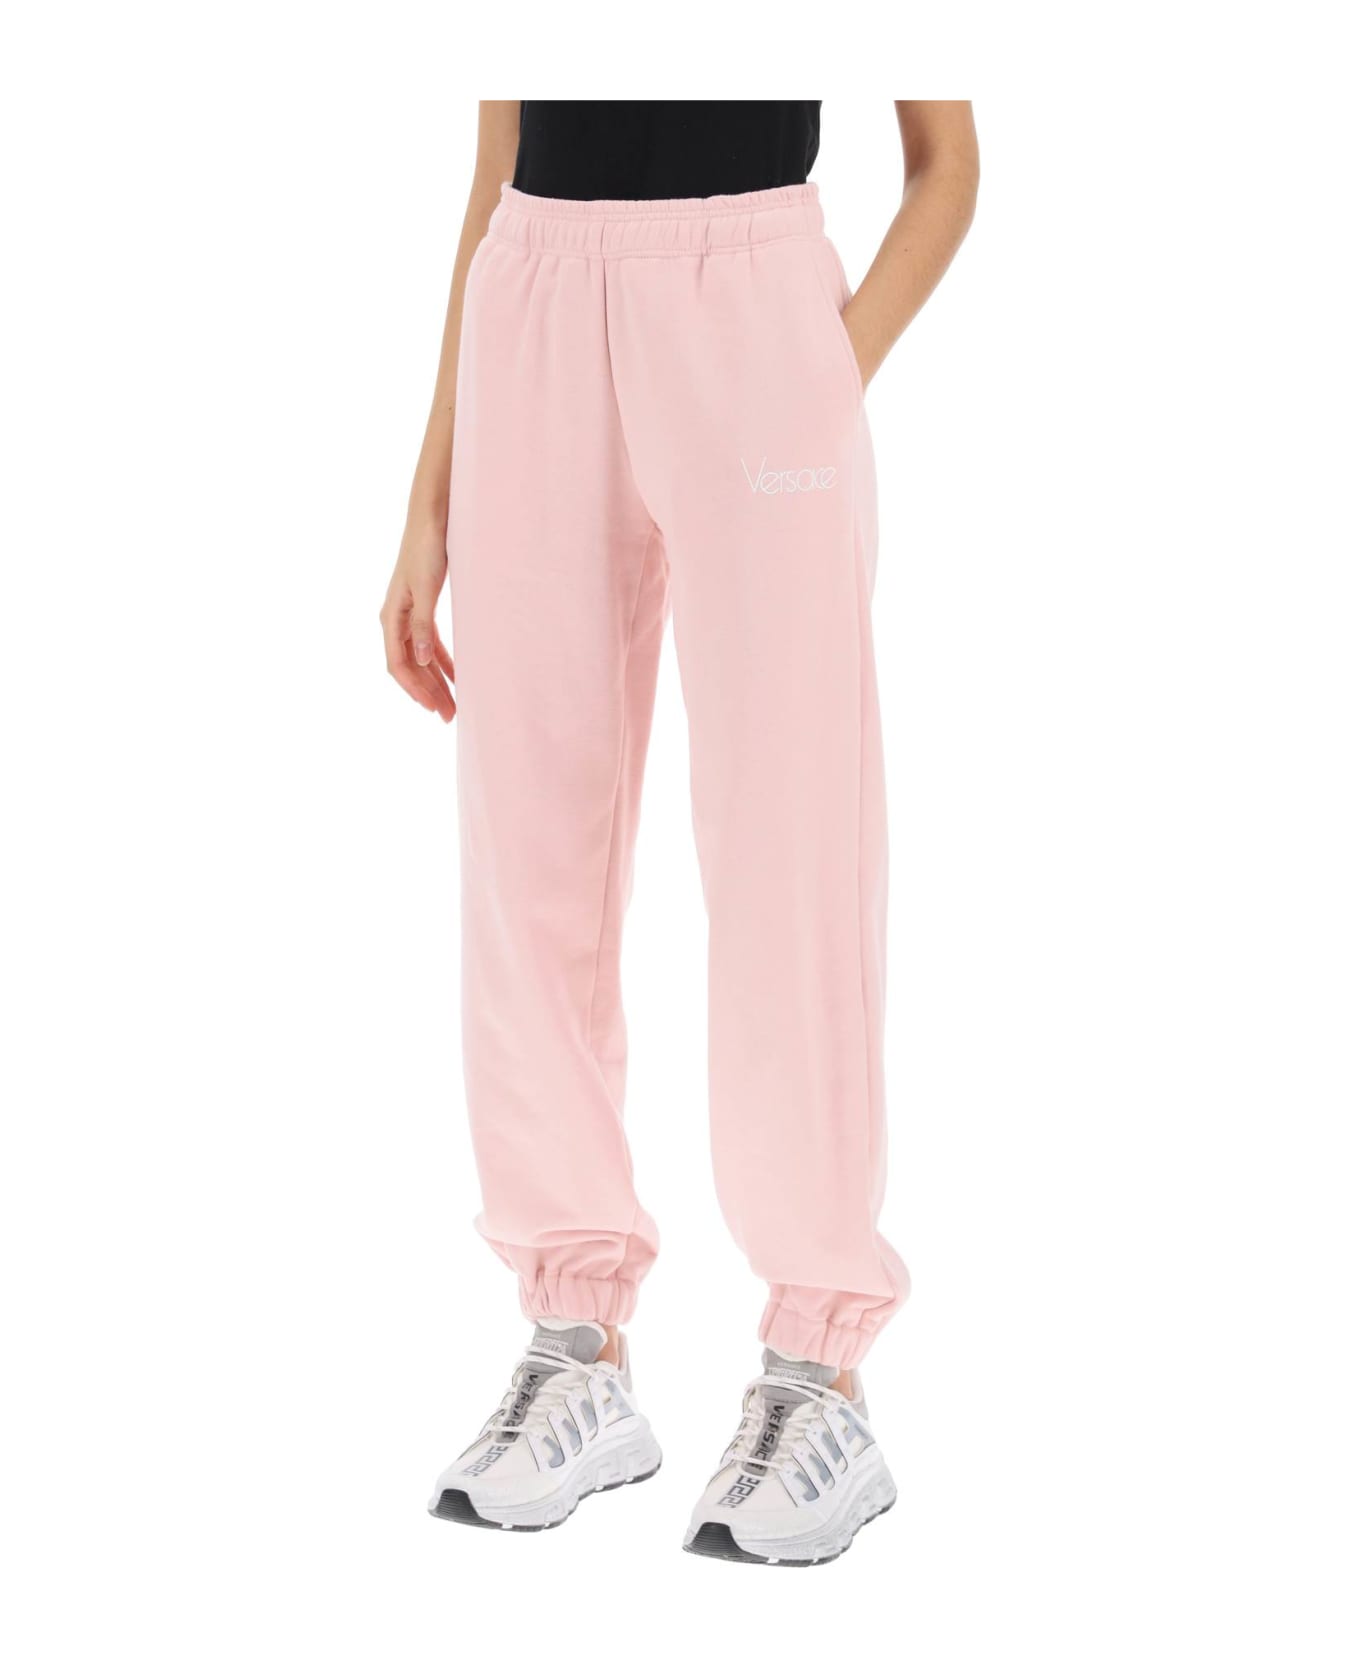 Versace 1978 Re-edition Joggers - PINK WHITE (Pink)